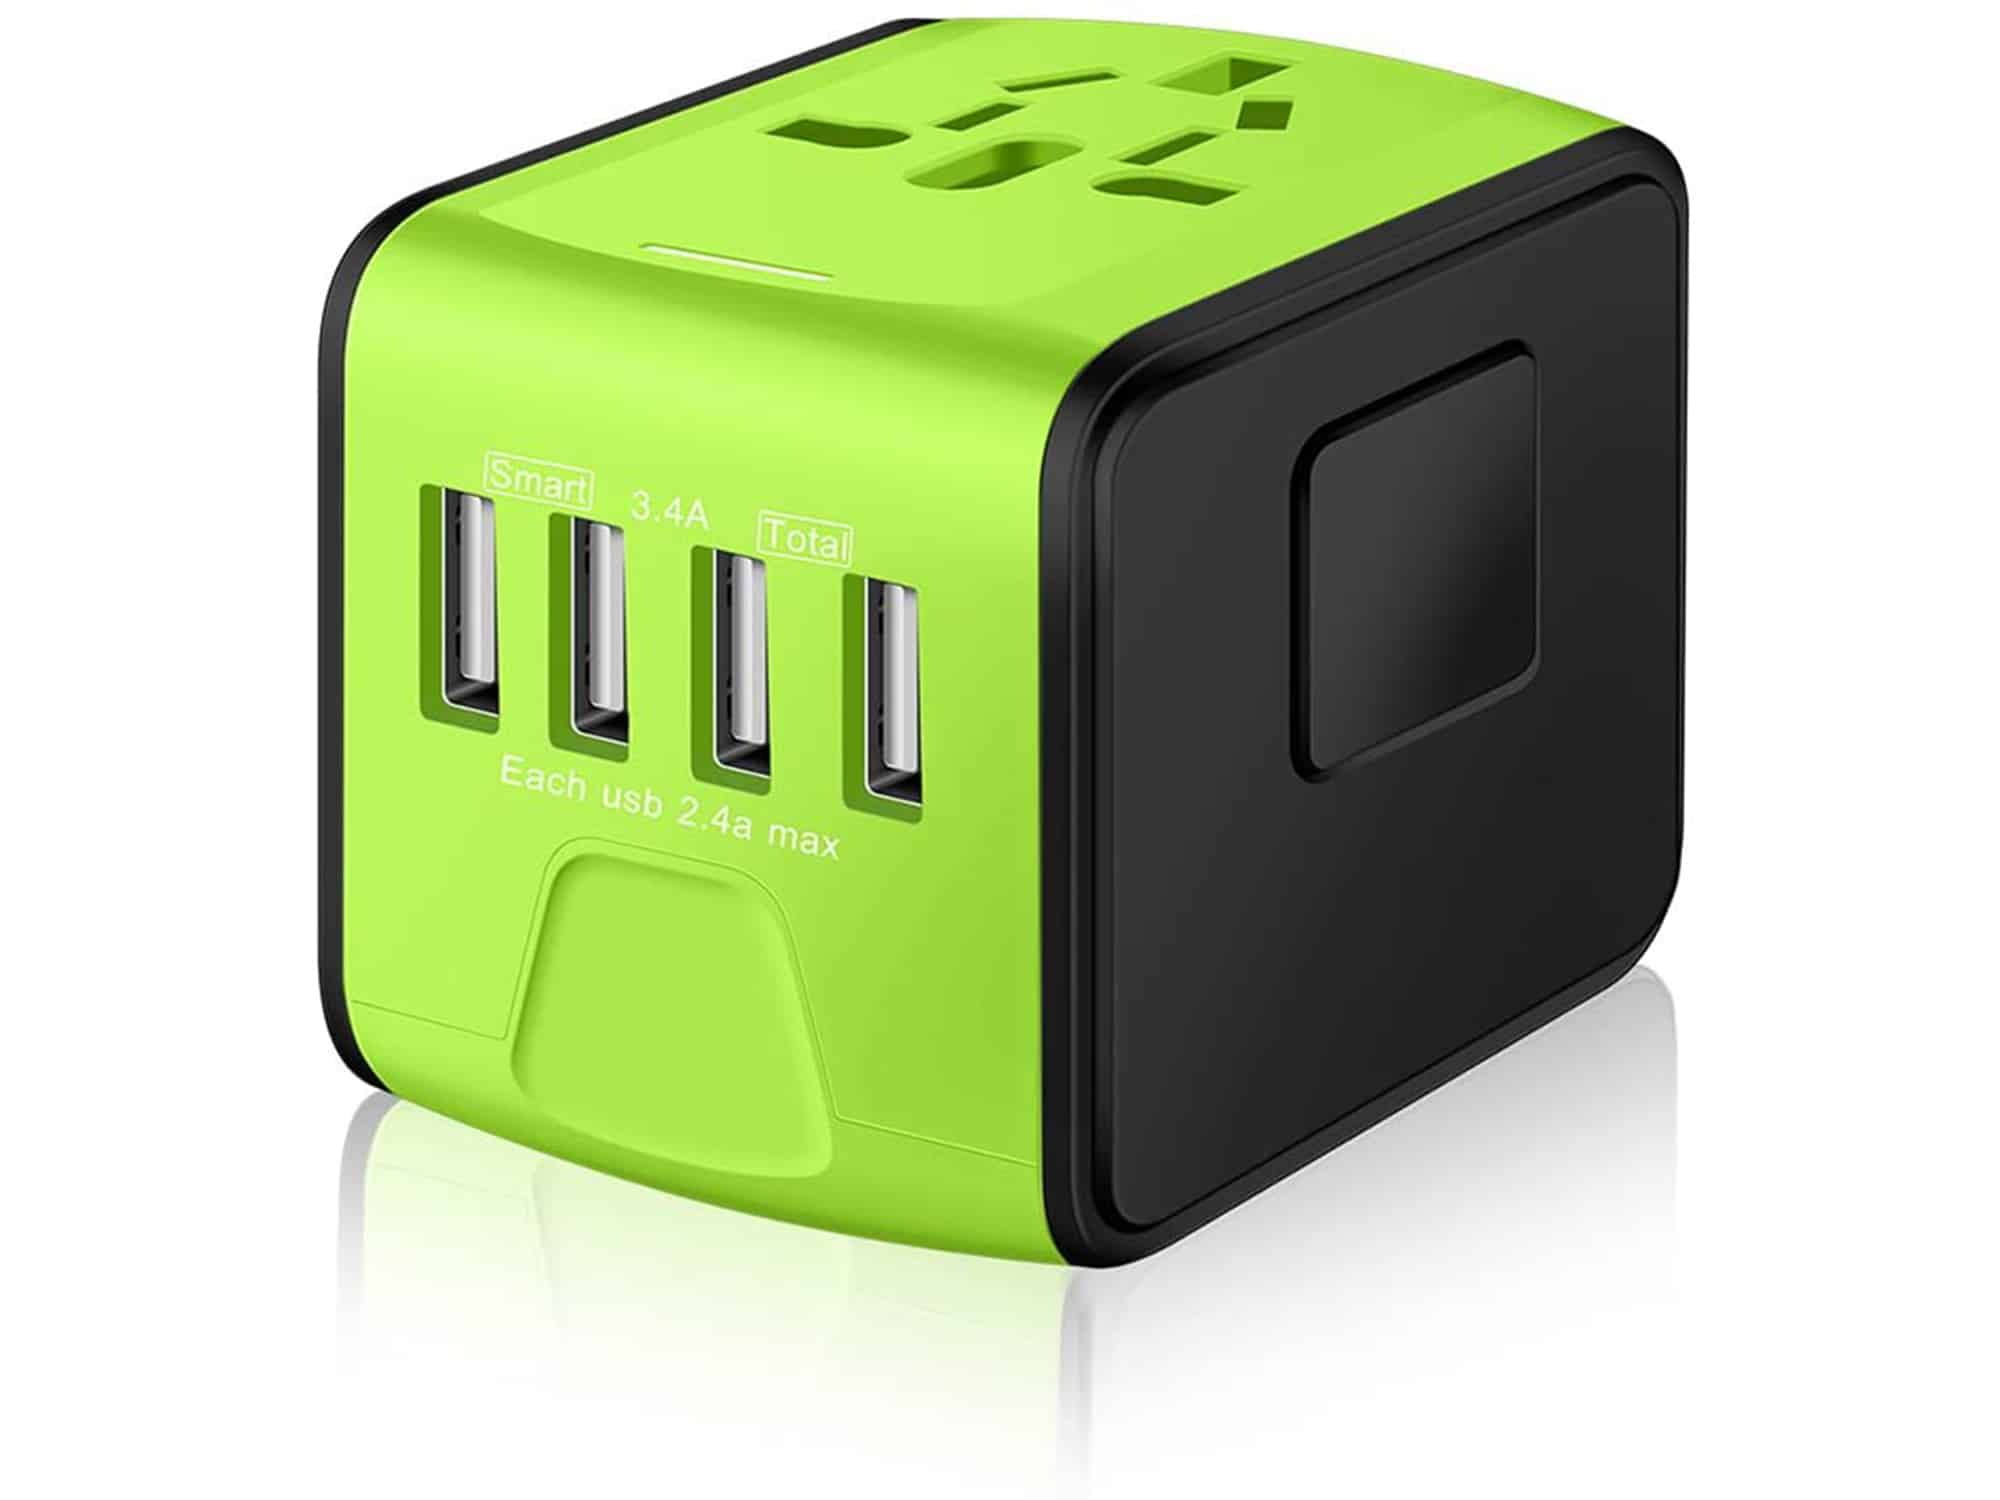 Adapter with USB ports